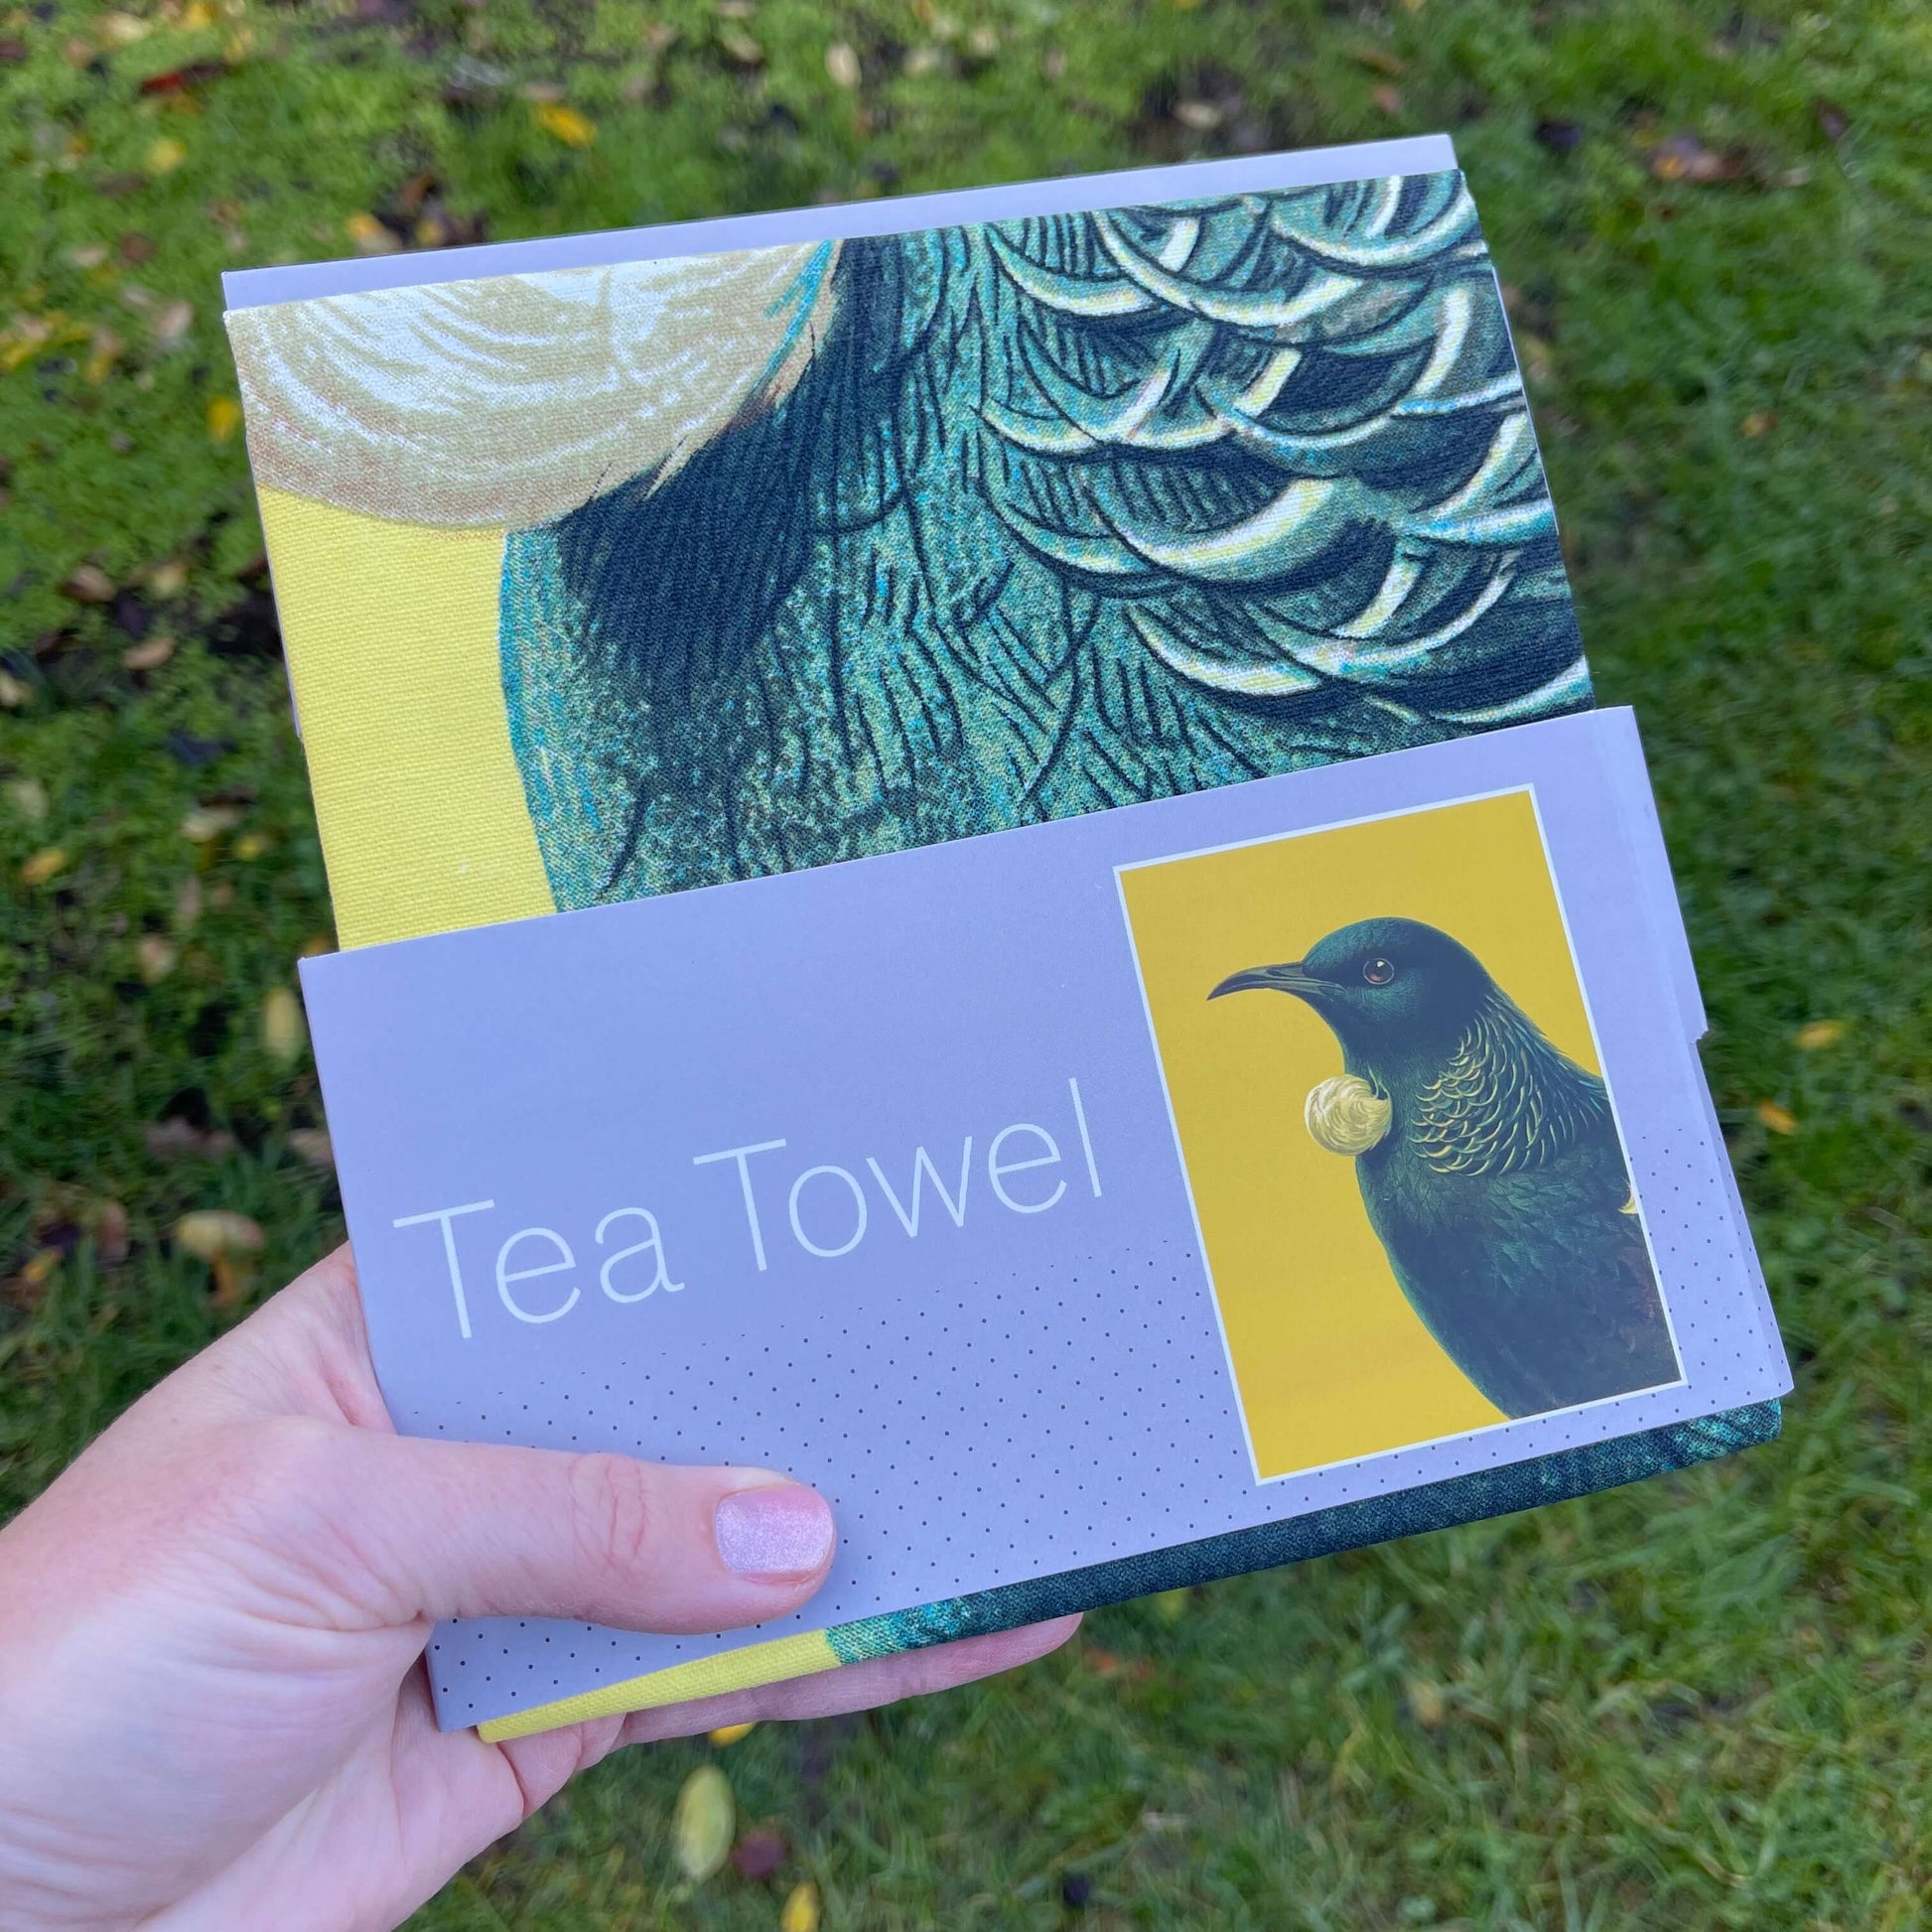 Bright yellow tea towel with a Tui on it.